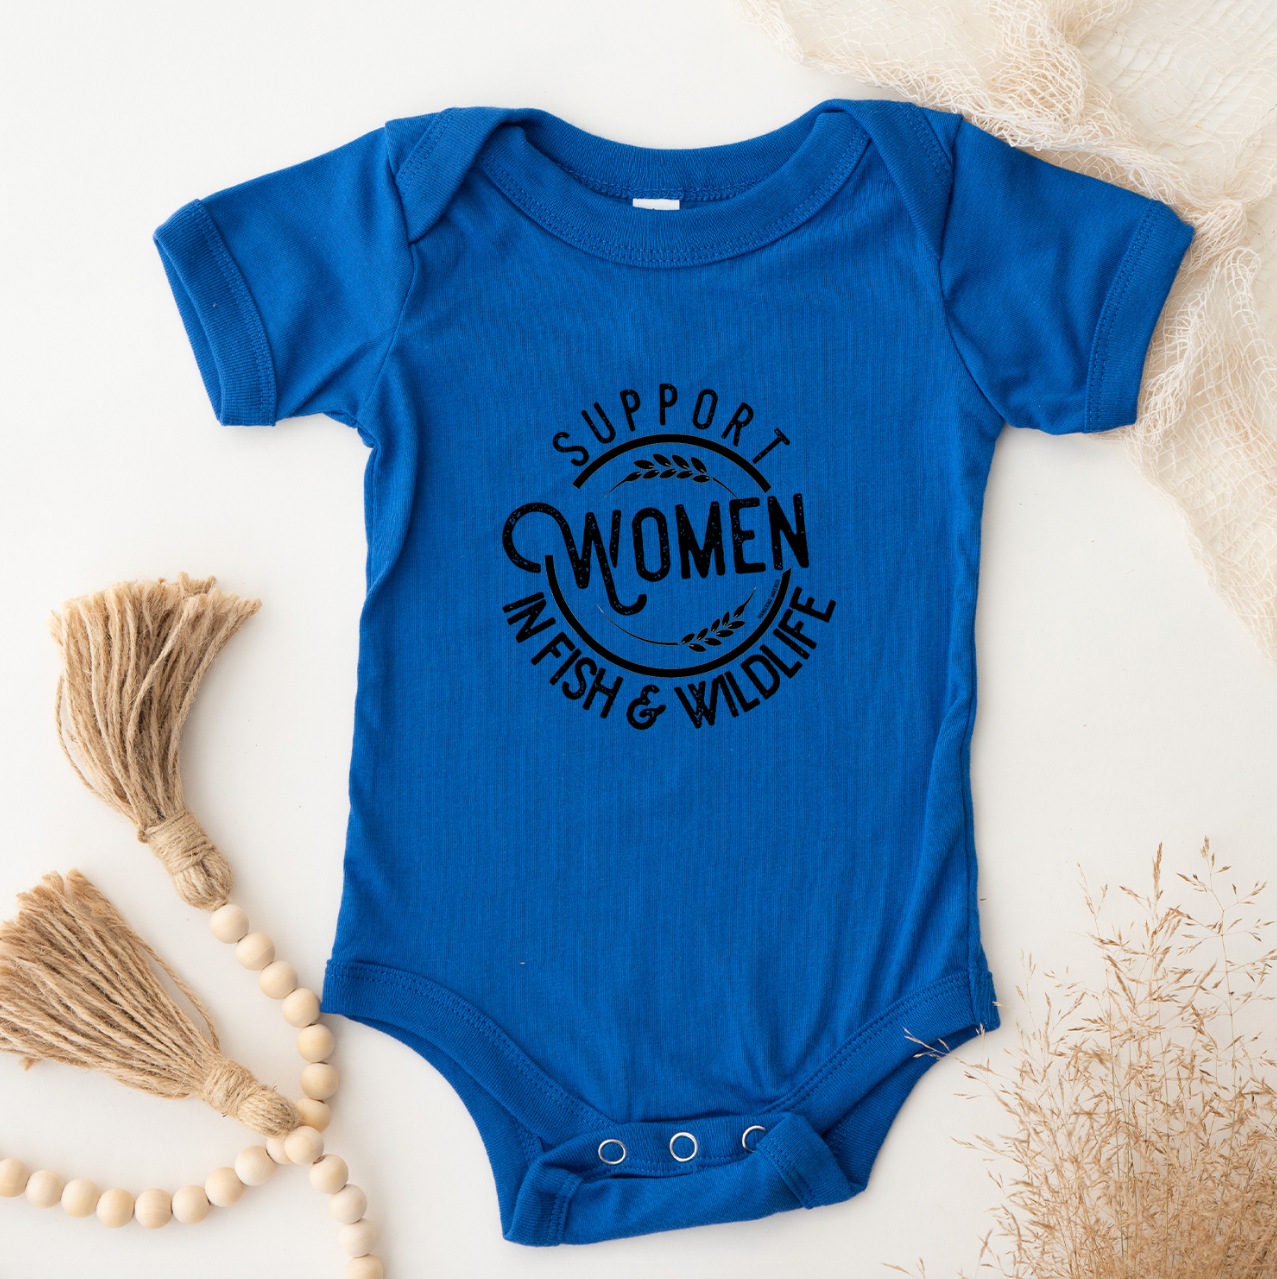 Support Women In Fish & Wildlife One Piece/T-Shirt (Newborn - Youth XL) - Multiple Colors!